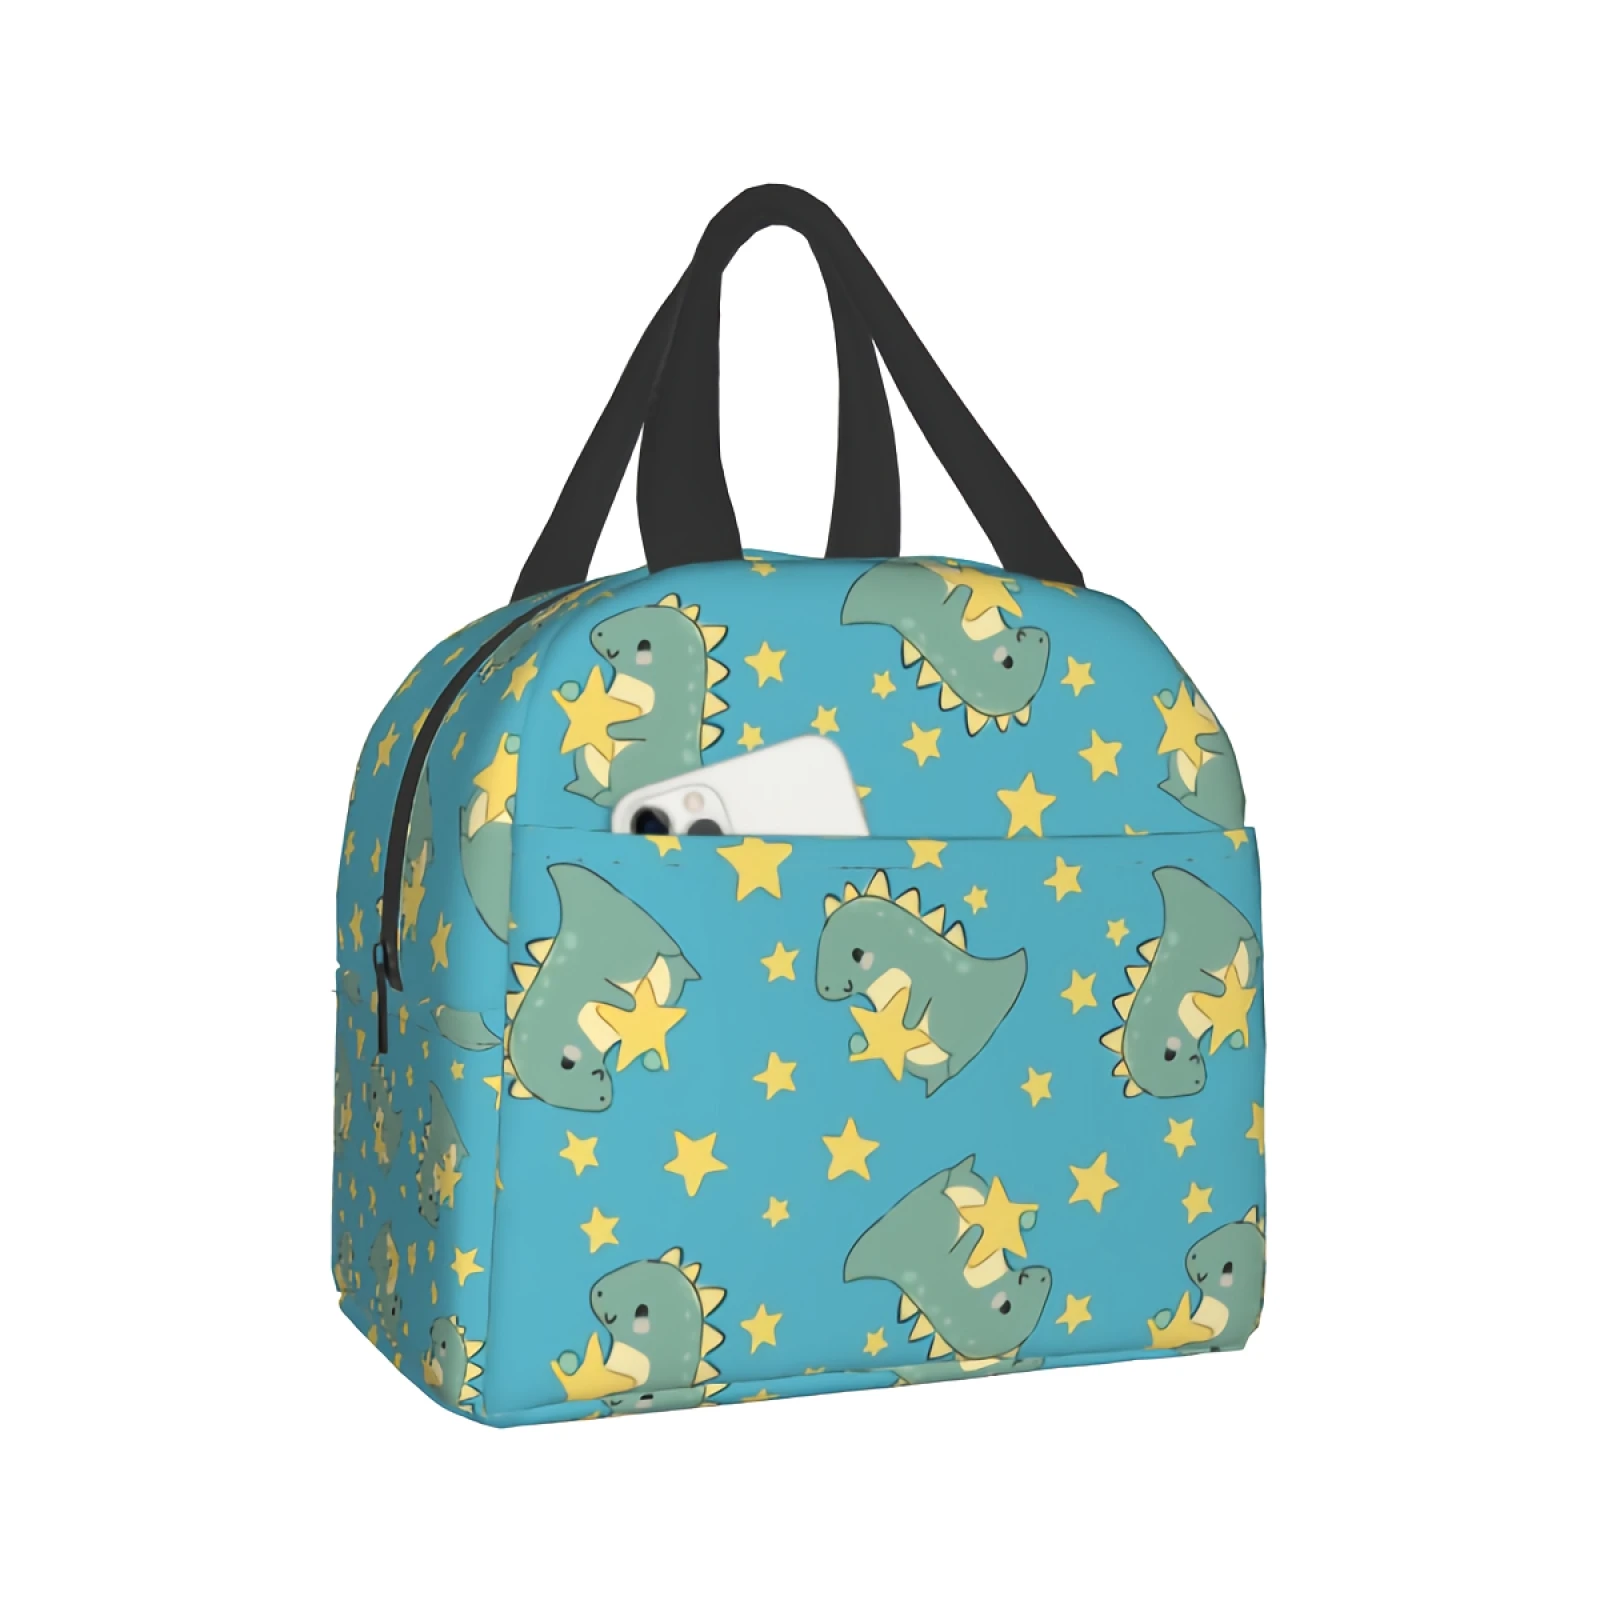 

Cartoon Dino Lunch Bag Cute Dinosaur And Stars Tote Bag Childish Insulated Lunch Bag for Women Men Teen Girls Boys